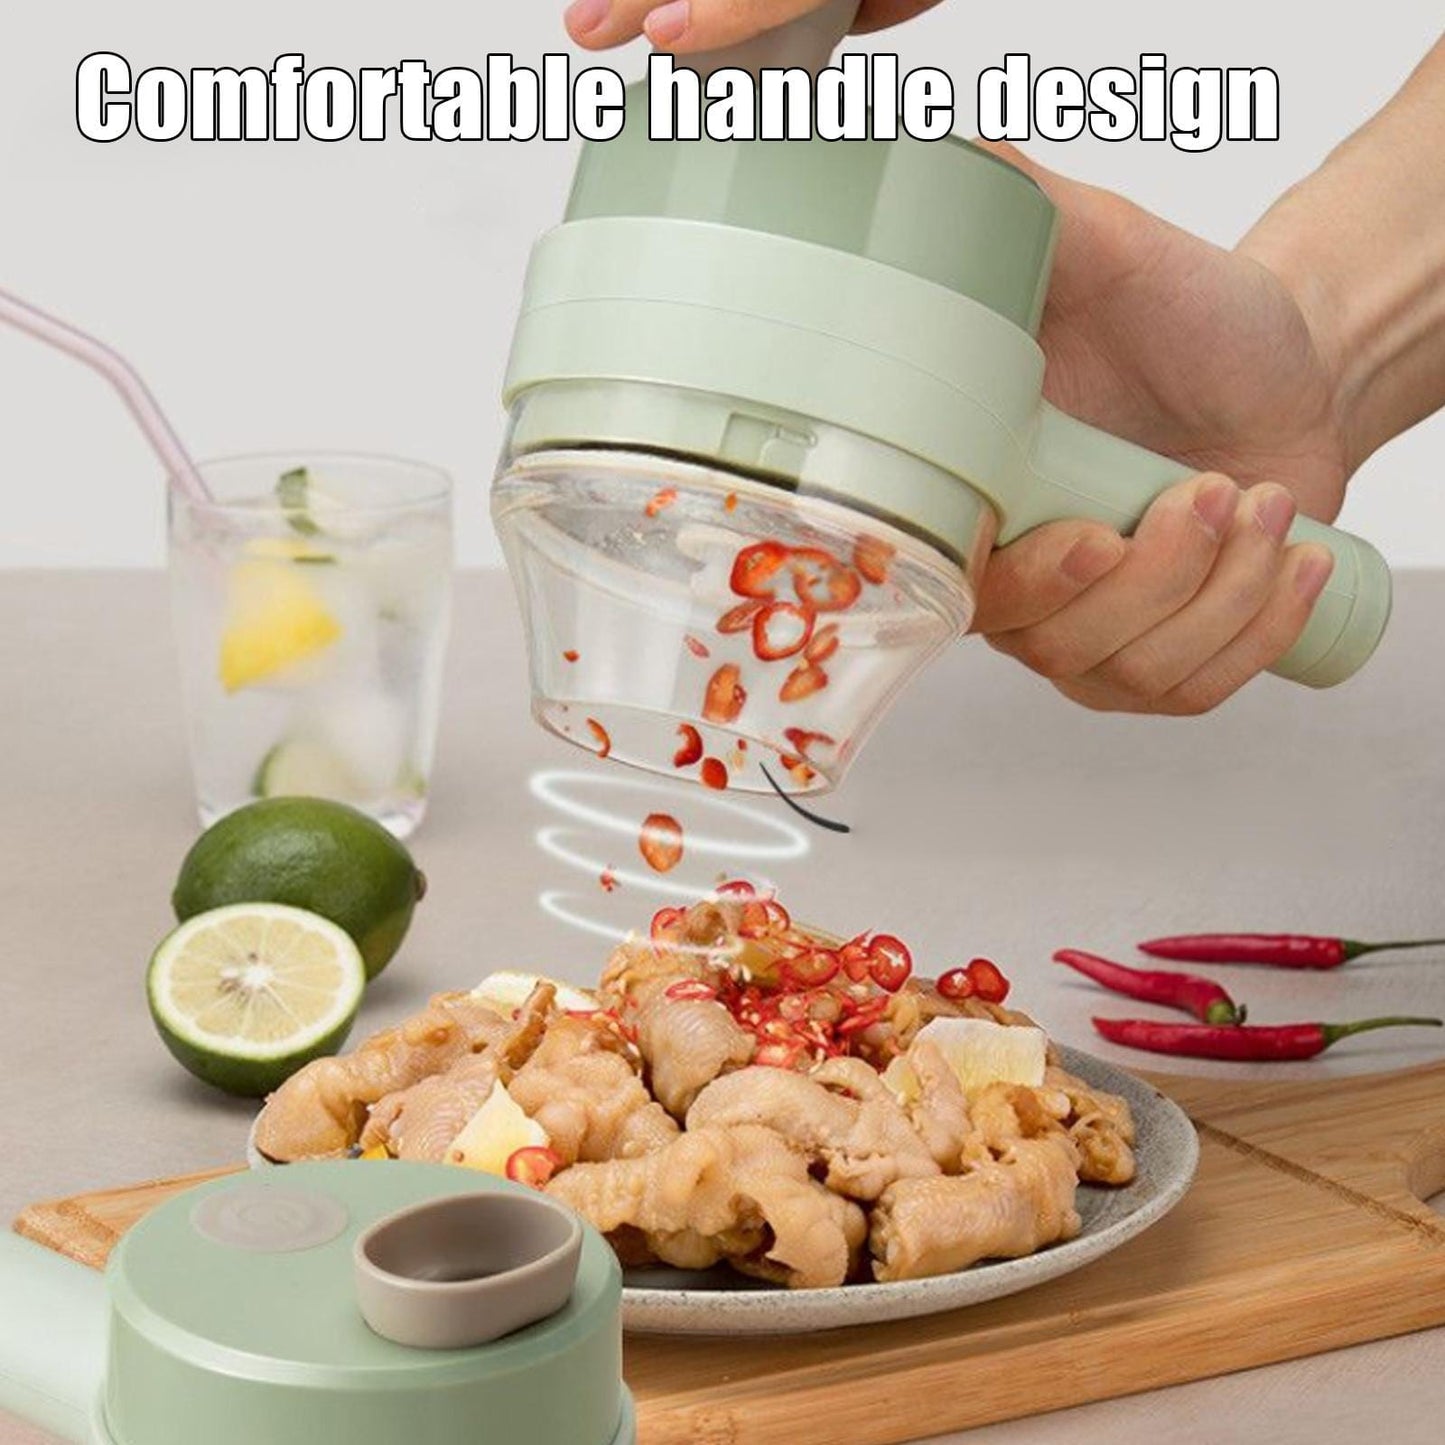 Wireless Vegetable Cutter Food Chopper – smarthome999